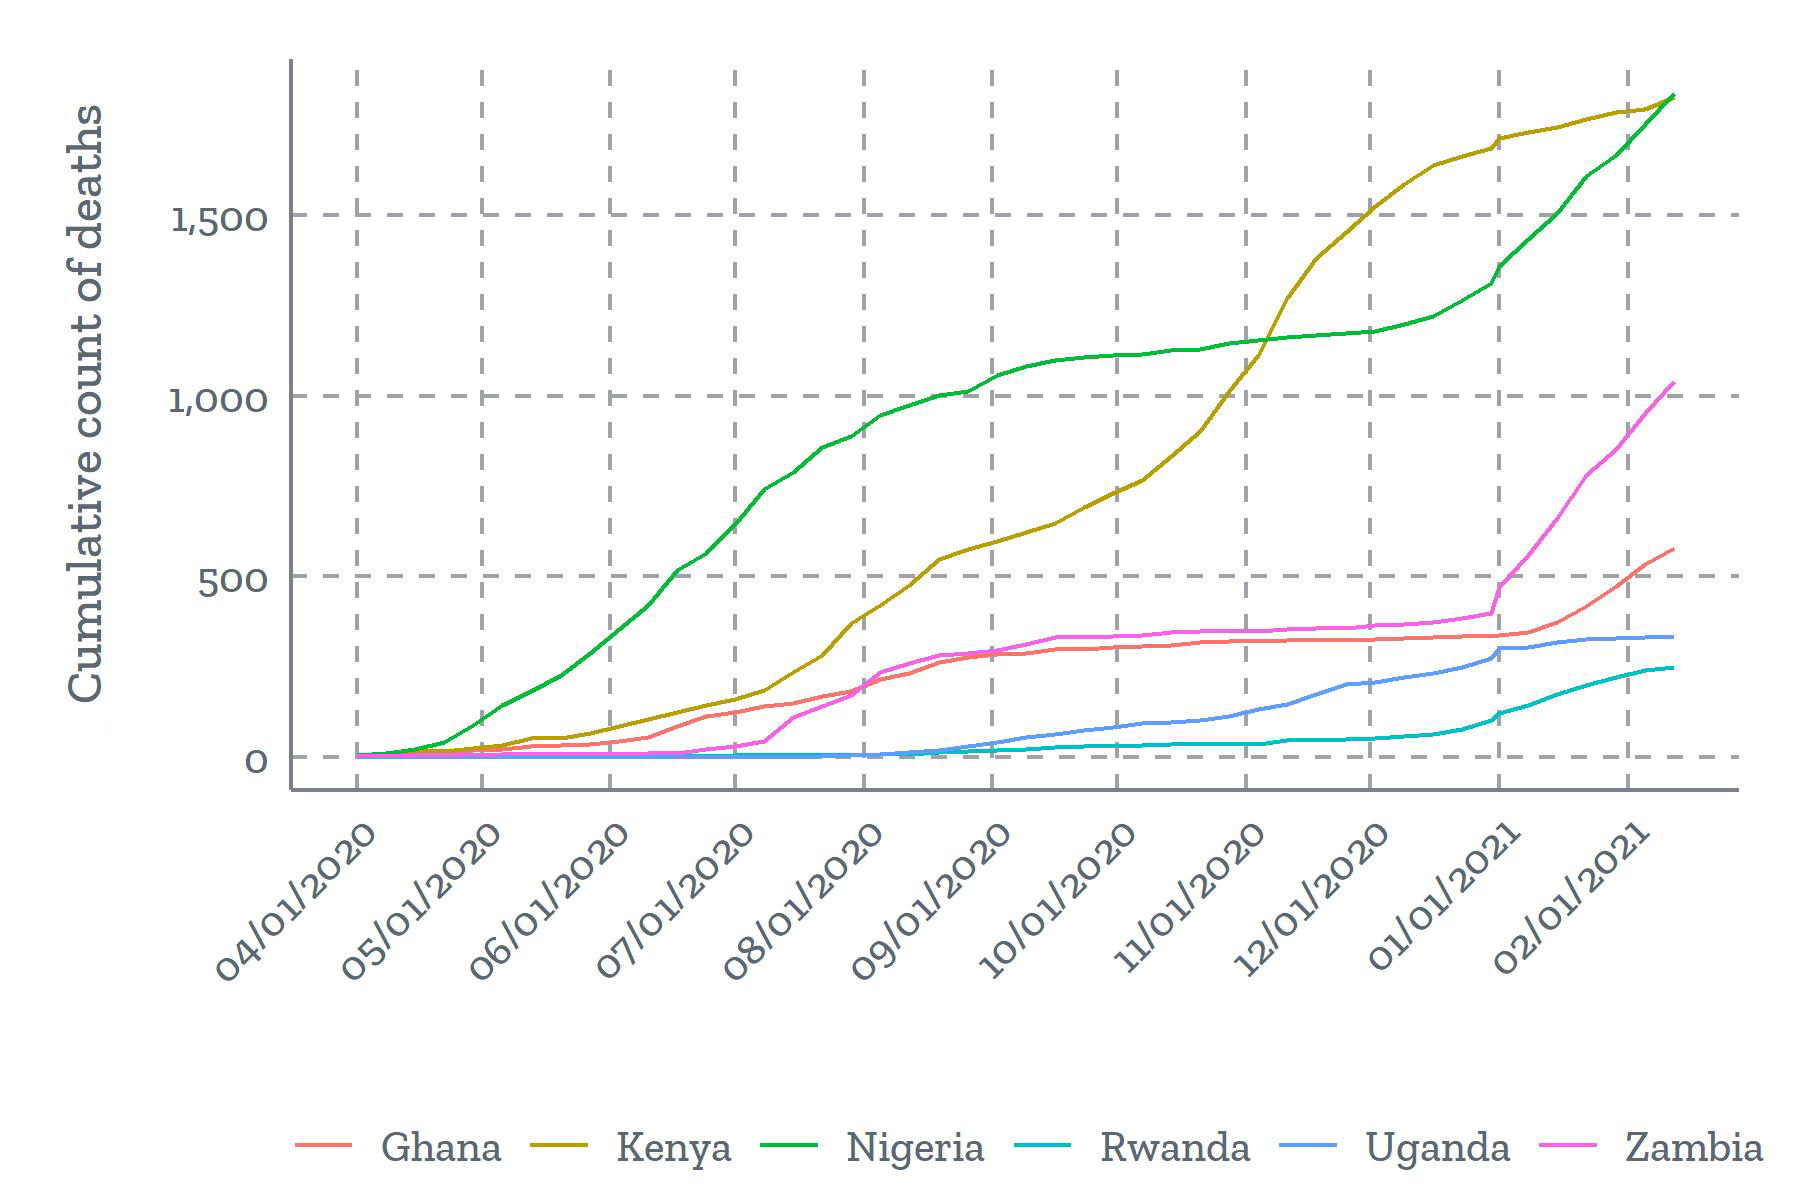 Line chart showing cumulative COVID-19 death counts from 4/1/2020 through 2/1/2021 for Ghana, Kenya, Nigeria, Rwanda, Uganda, and Zambia. The lines for Kenya and Nigeria are consistently higher than the others. 